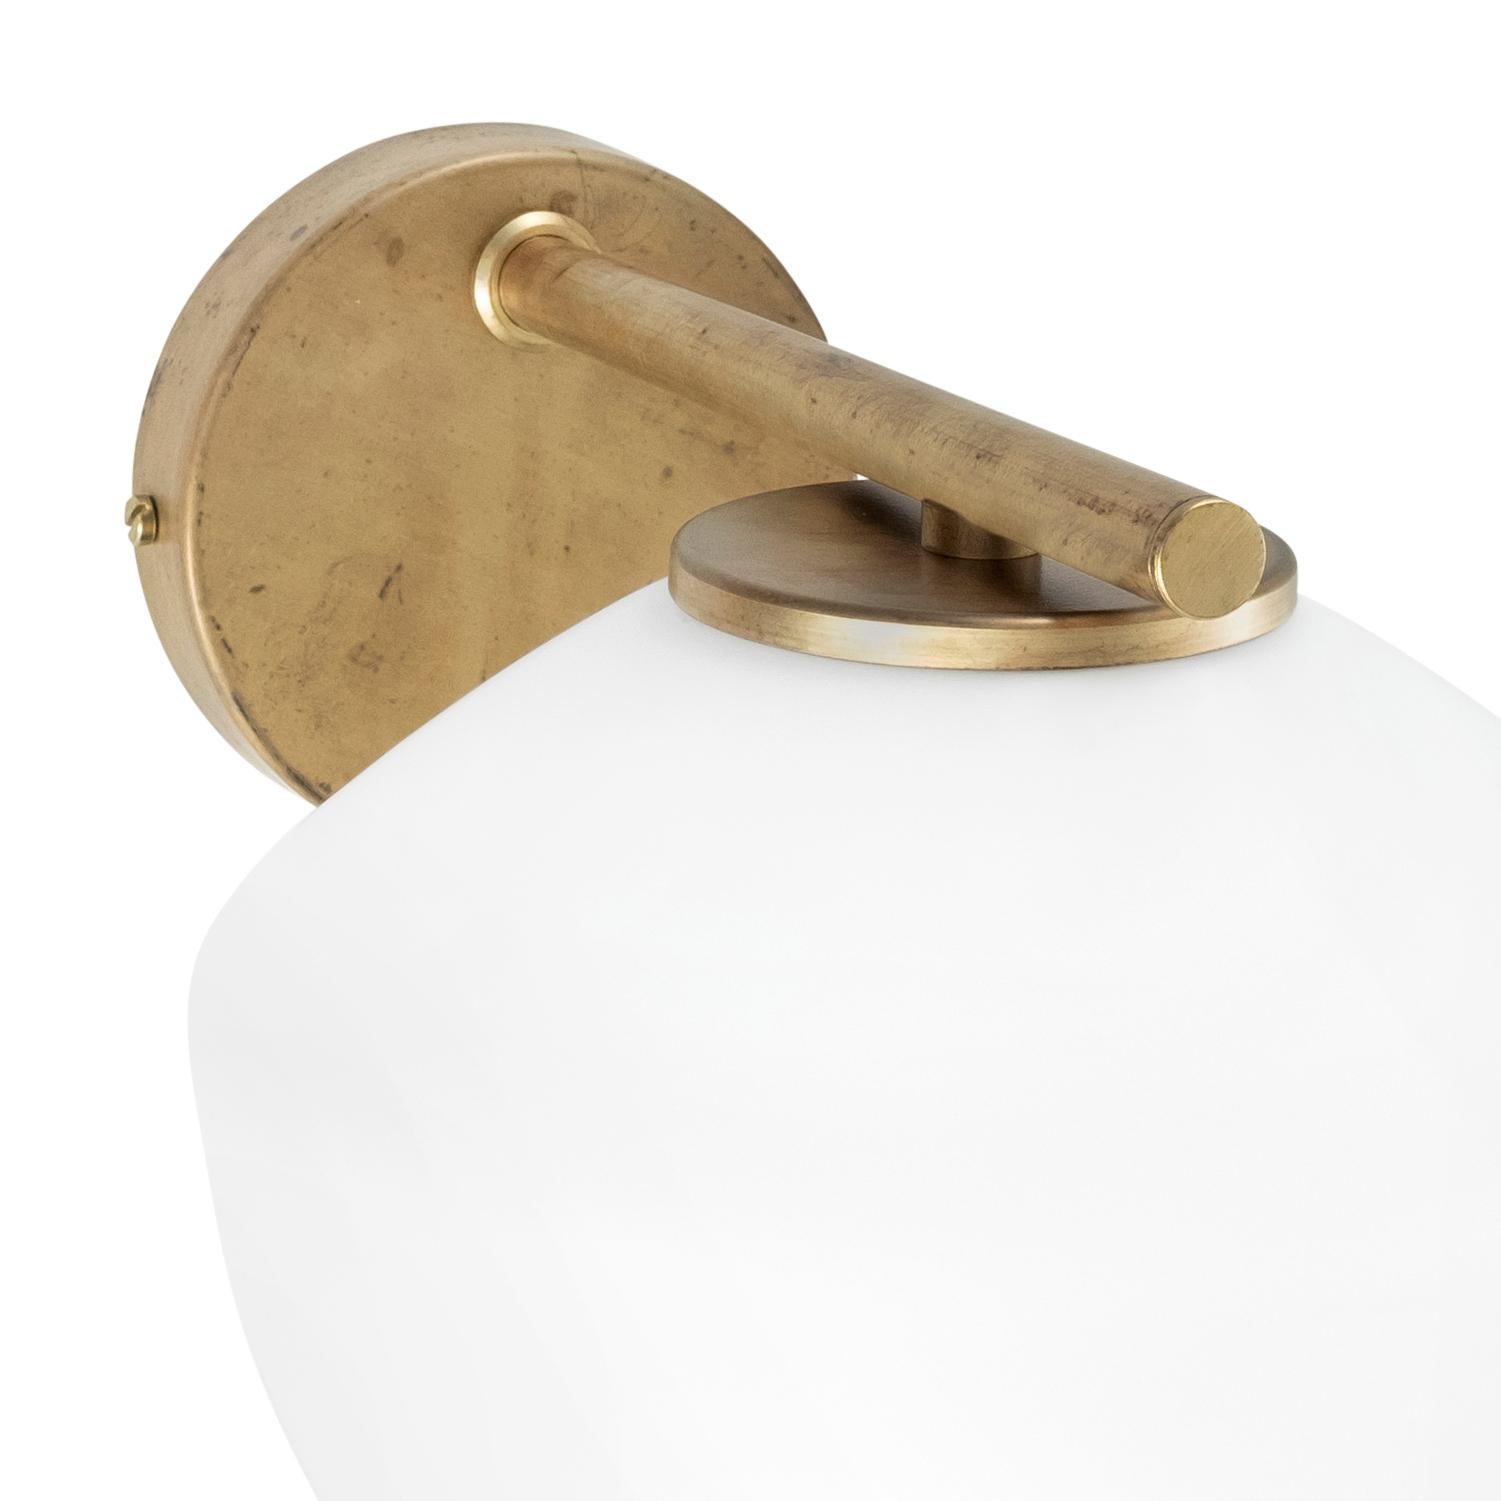 Wall lamp model DK designed by Henrik Tengler and manufactured by Konsthantverk.

The production of lamps, wall lights and floor lamps are manufactured using craftsman’s techniques with the same materials and techniques as the first